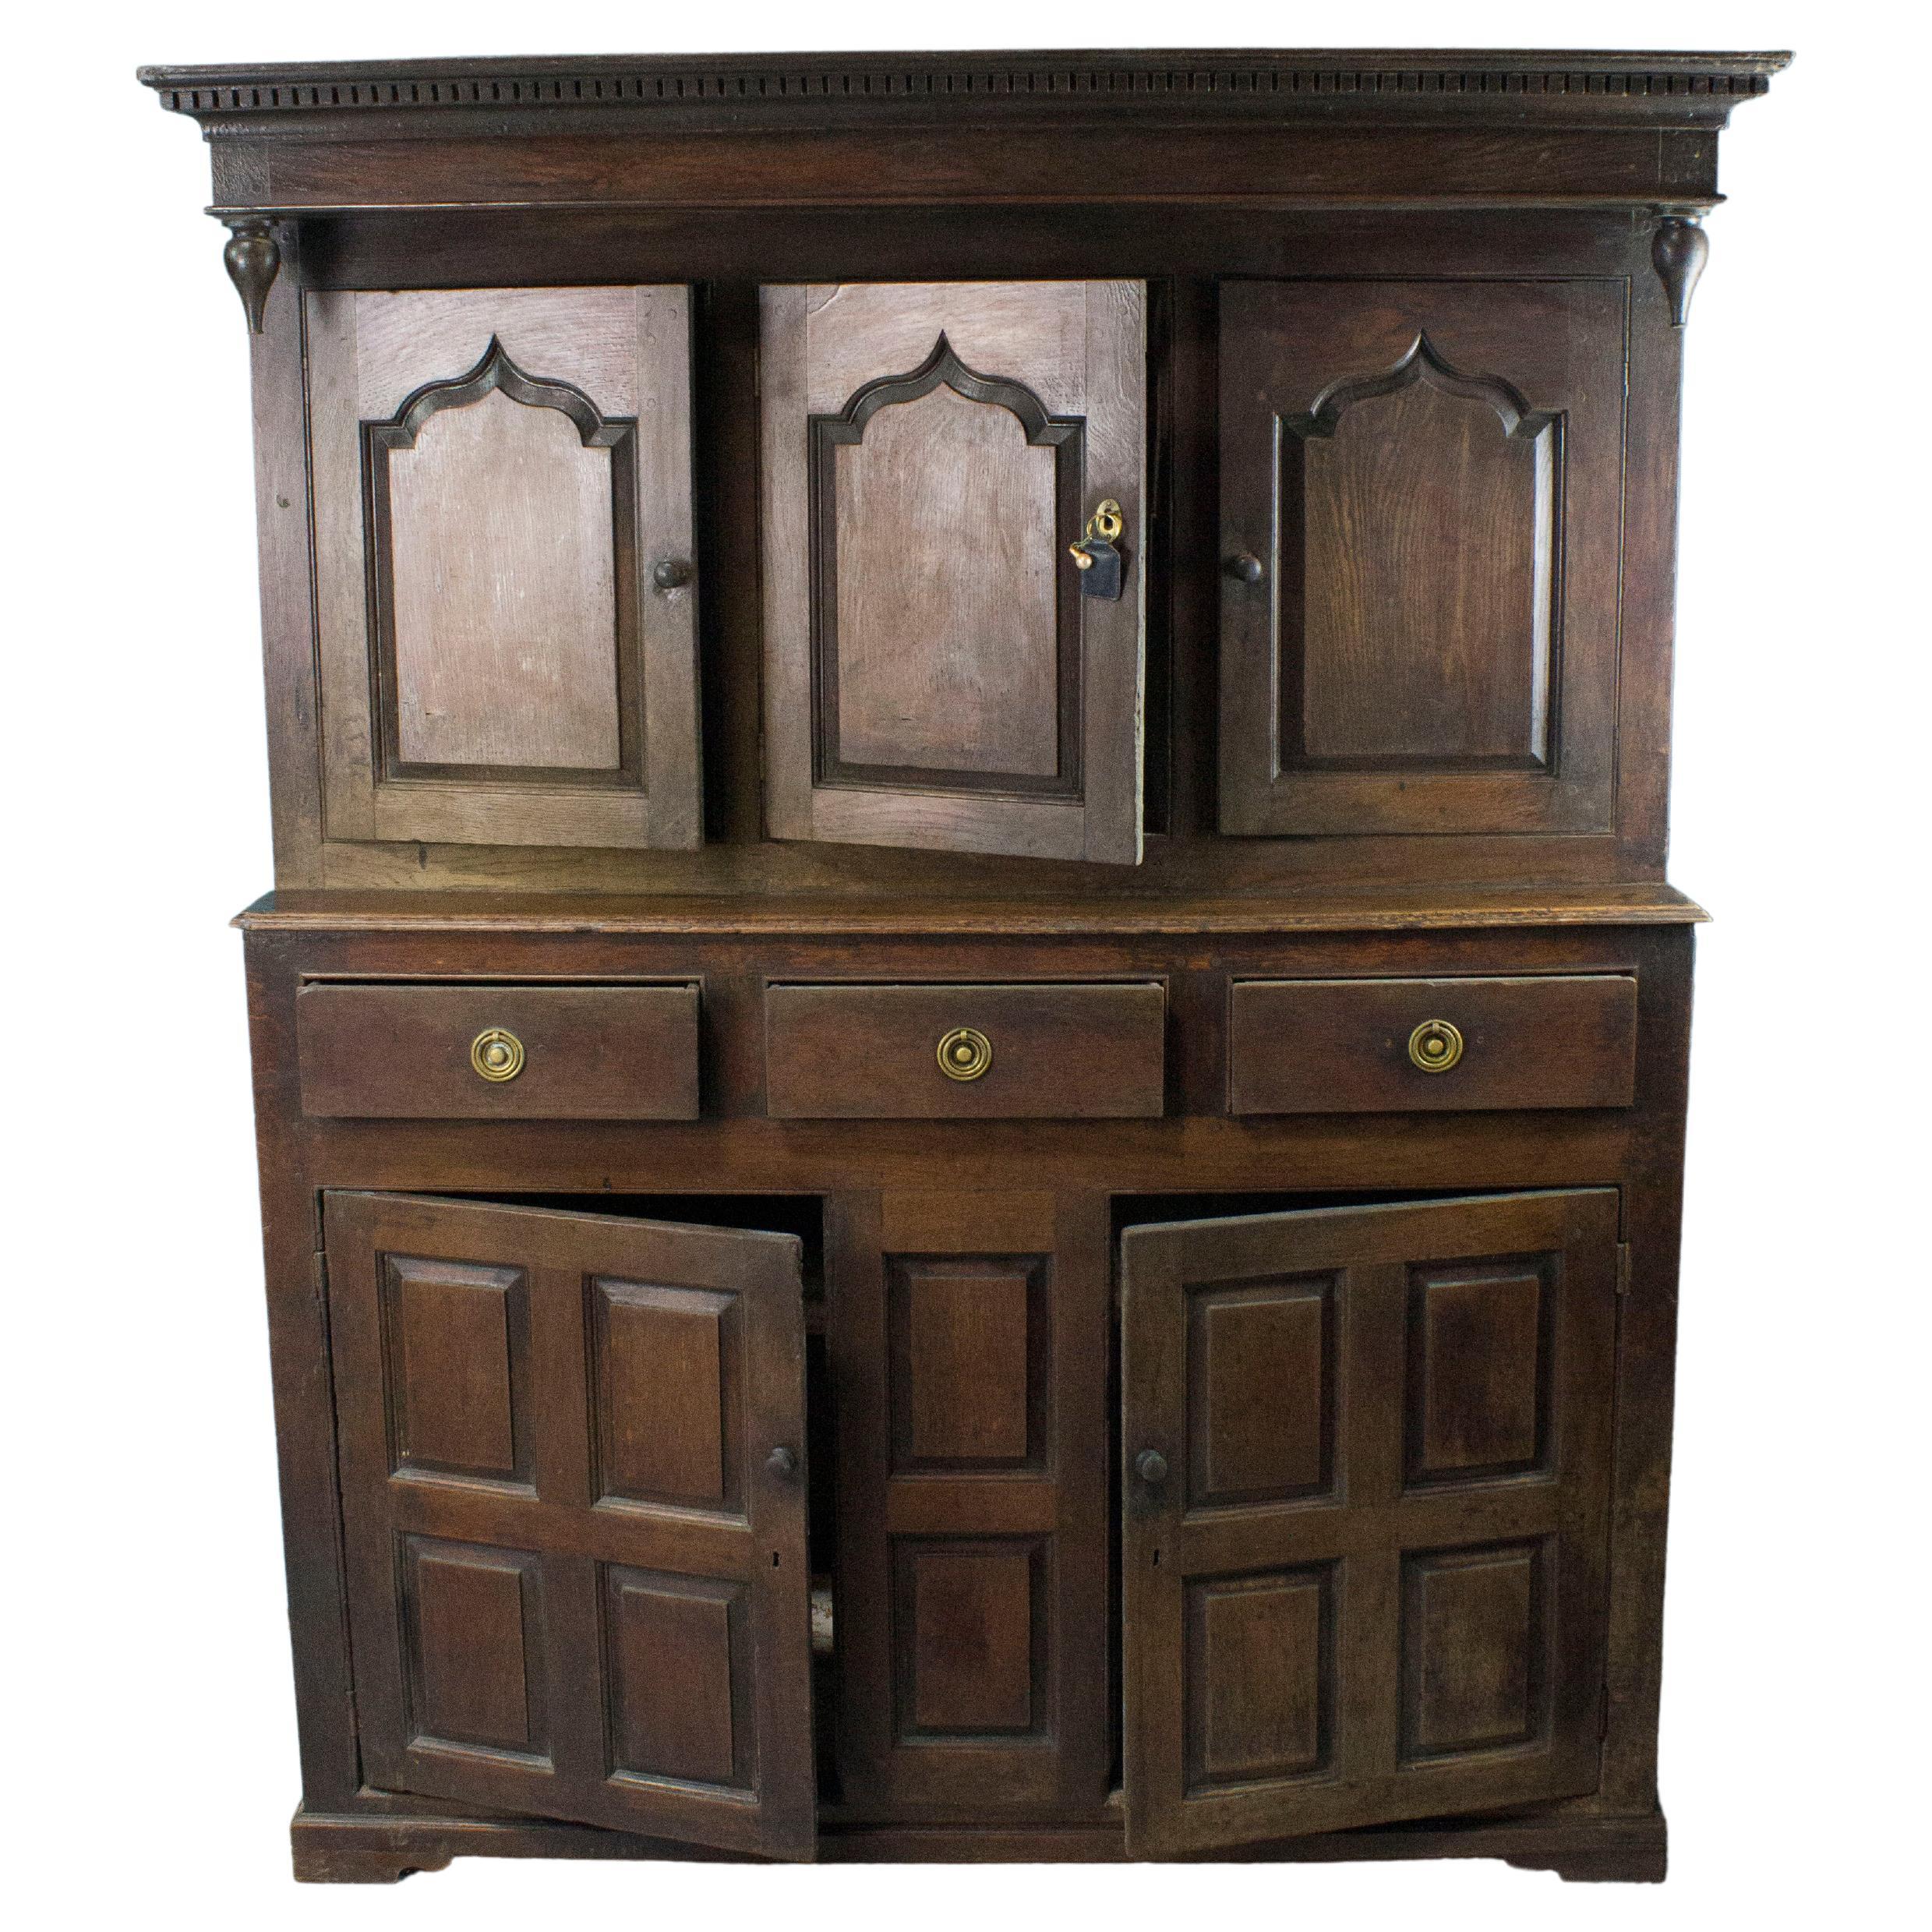 18th century oak sideboard opening with two doors with panels in the lower part with wooden buttons and three belt drawers with brass catches. The upper part of the cupboard, set back slightly, has three molded doors and a projecting cornice